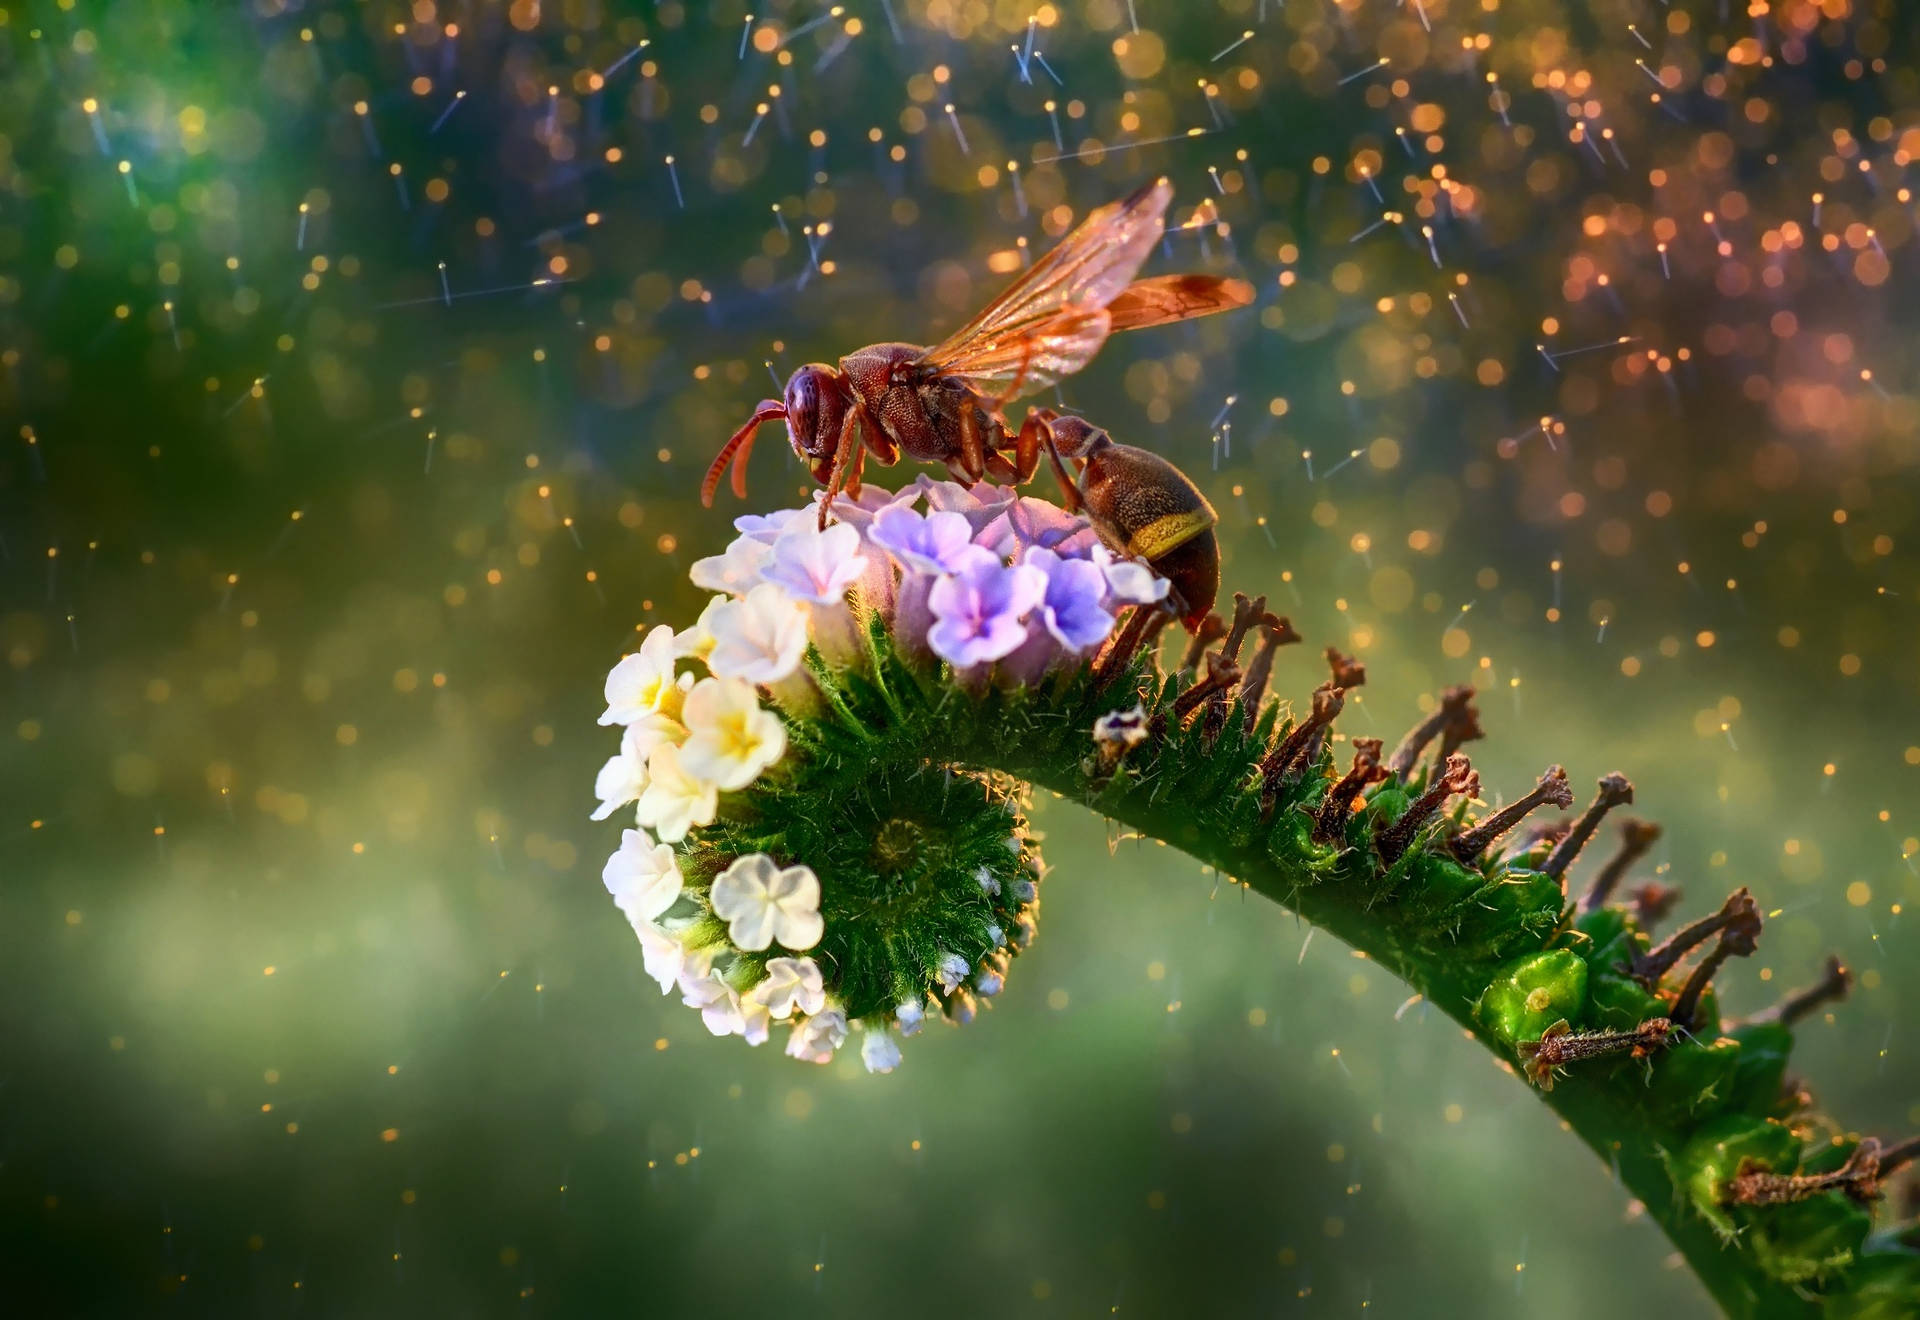 Insect Perched On Colorful Flowers